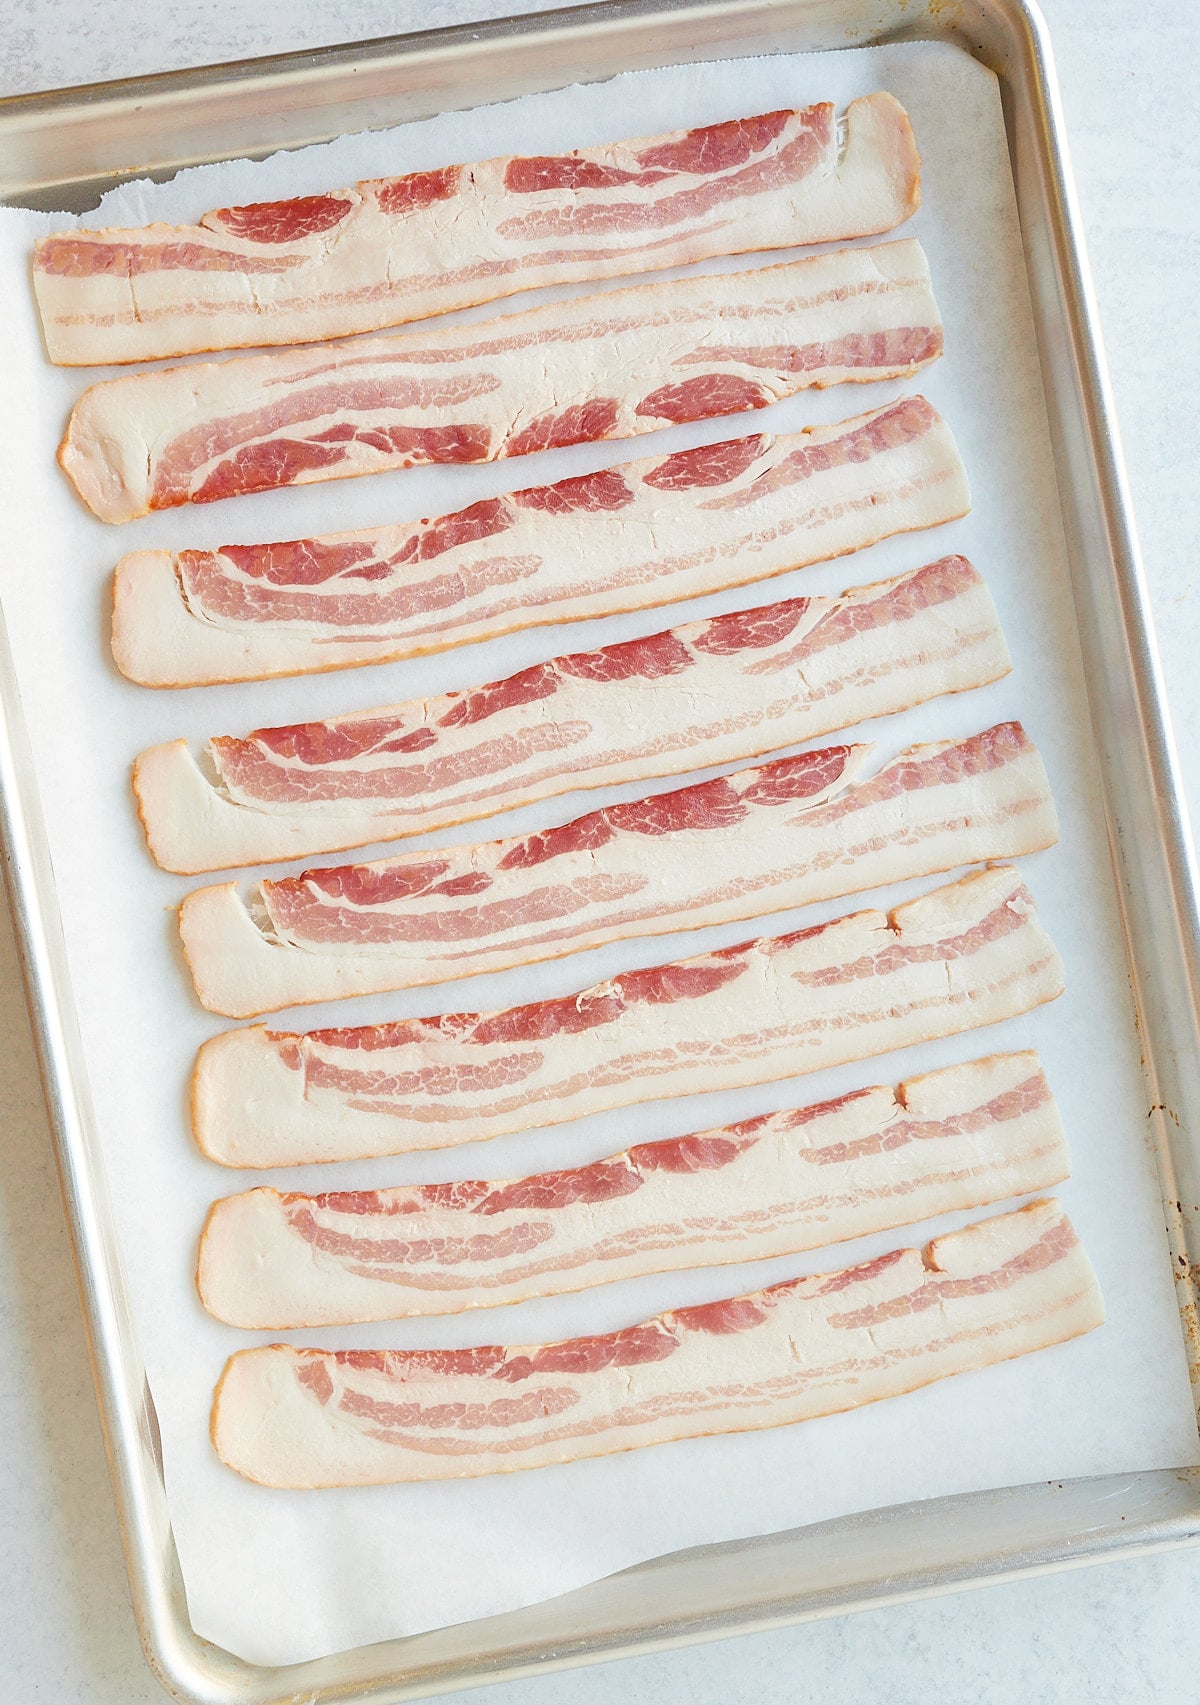 Strips of bacon on a lined baking sheet before being cooked.